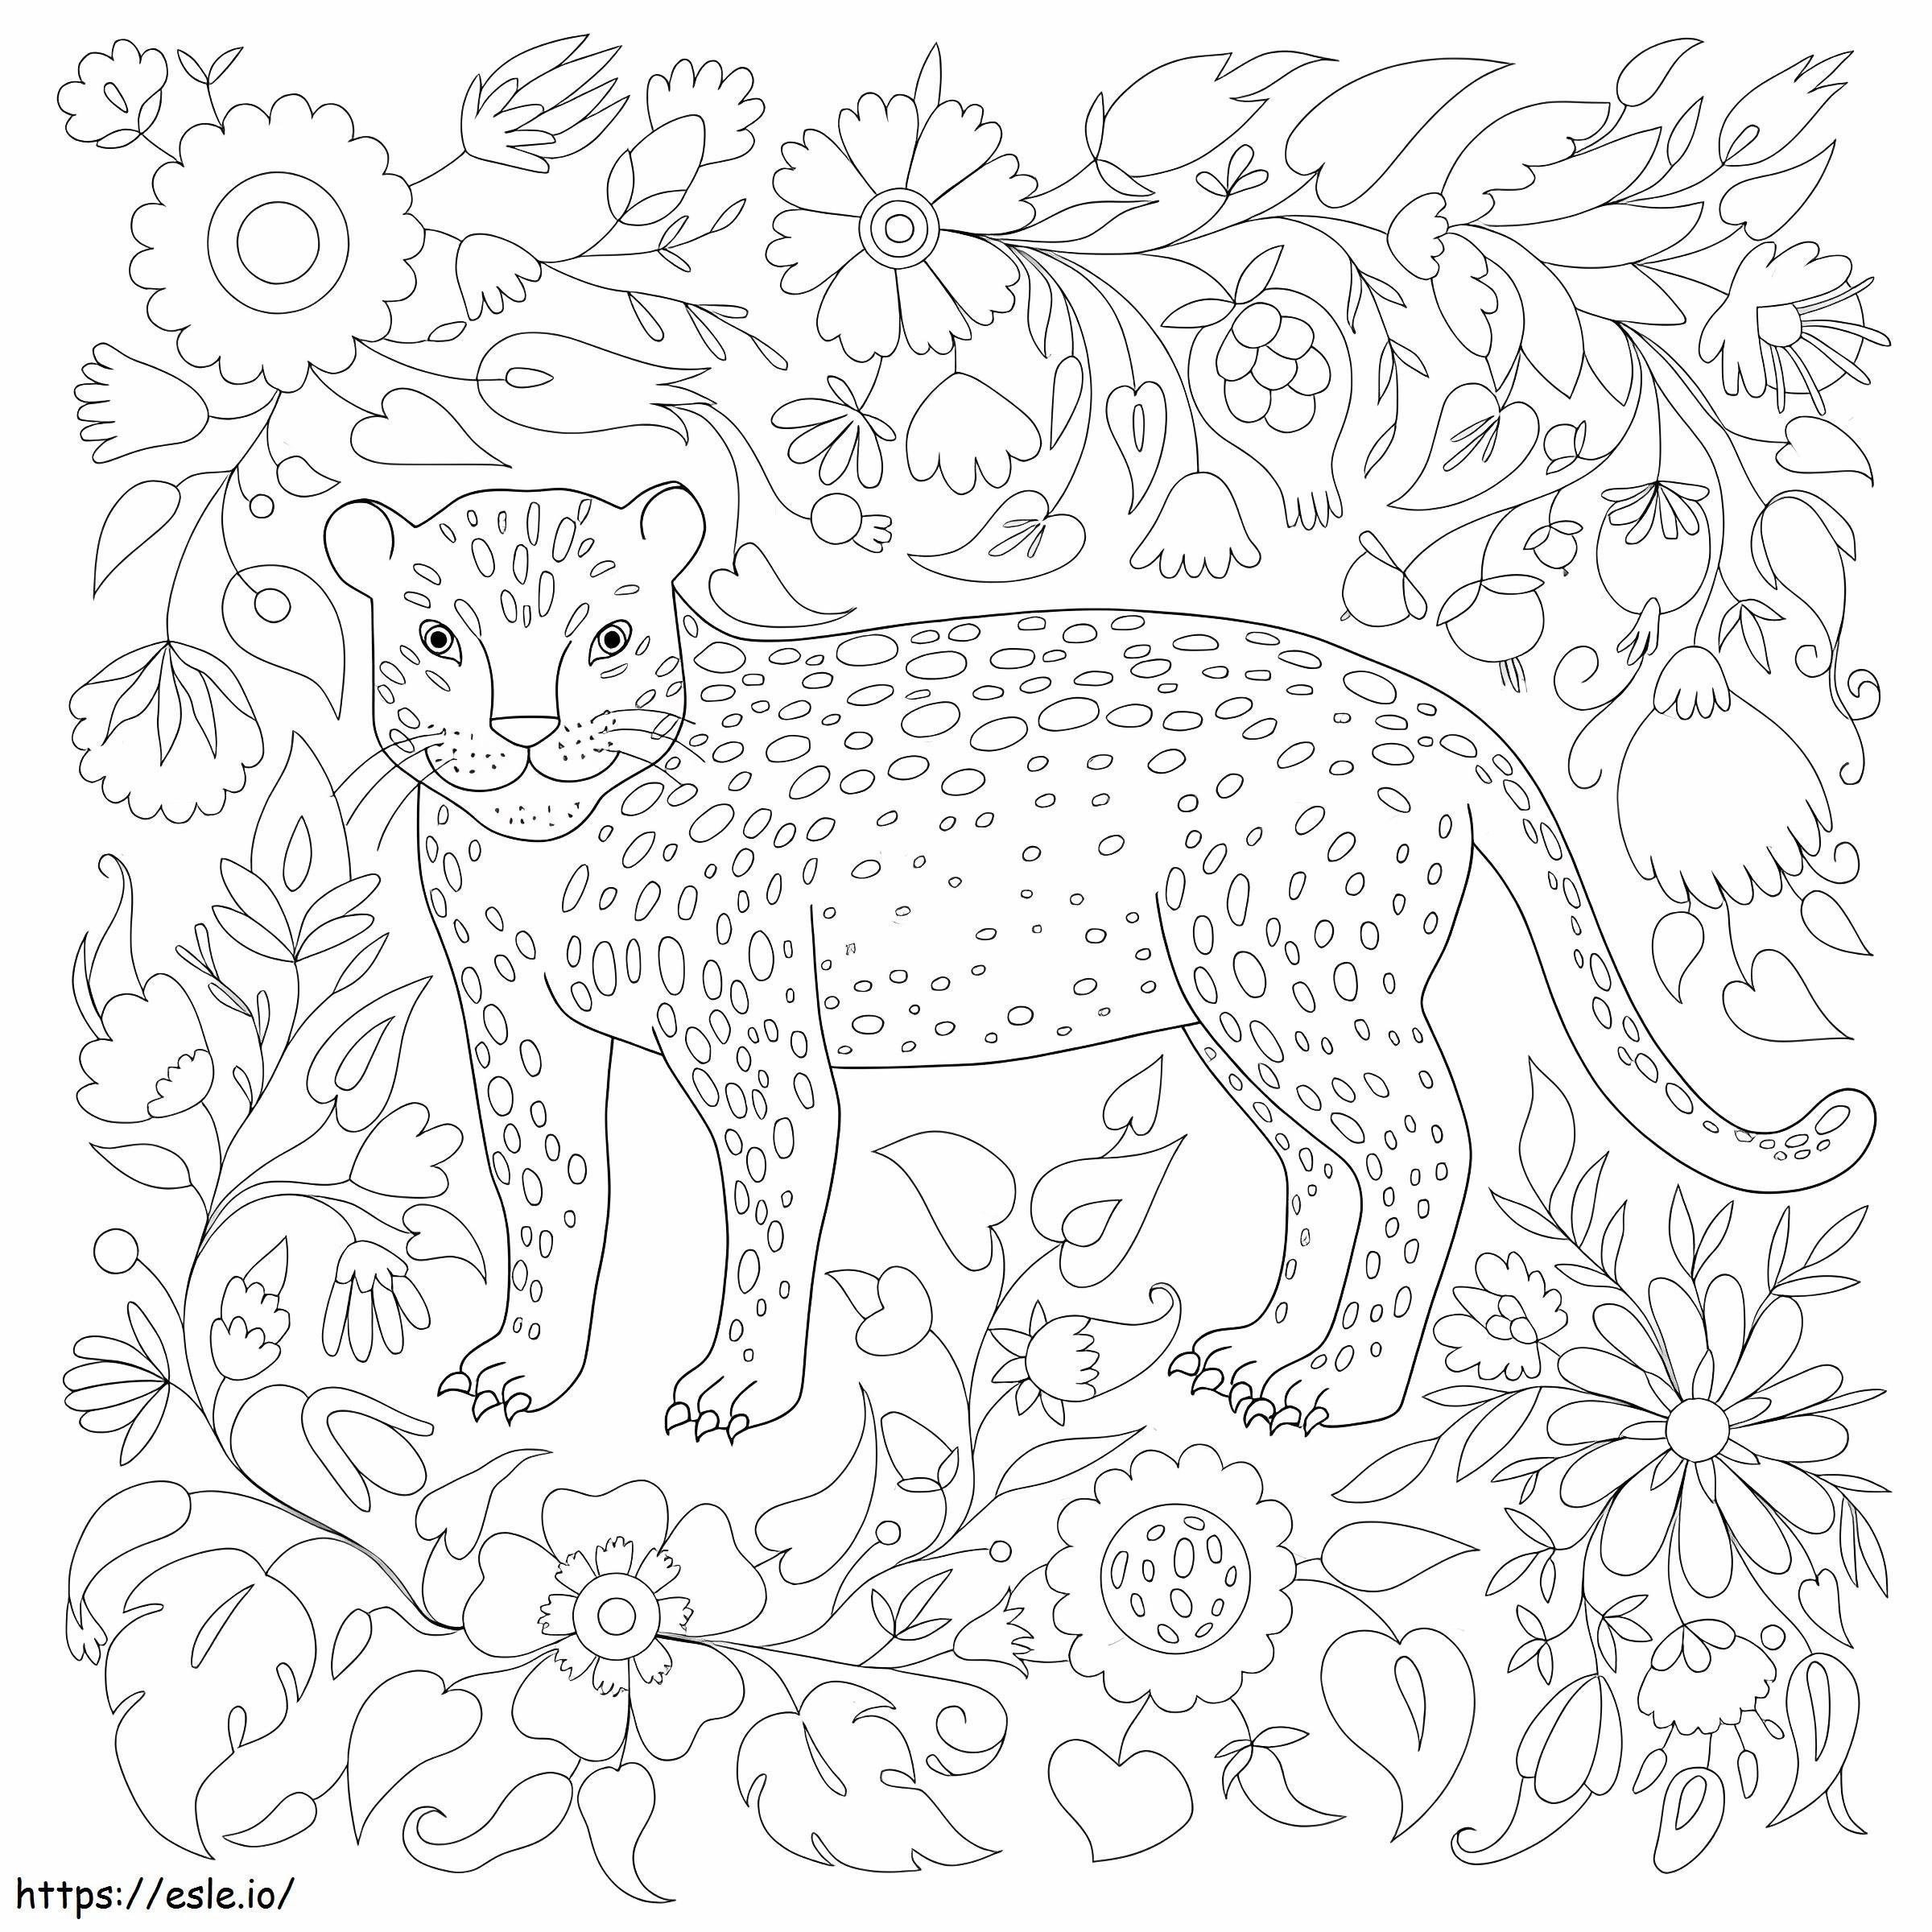 Jaguar With Flowers And Leaves coloring page